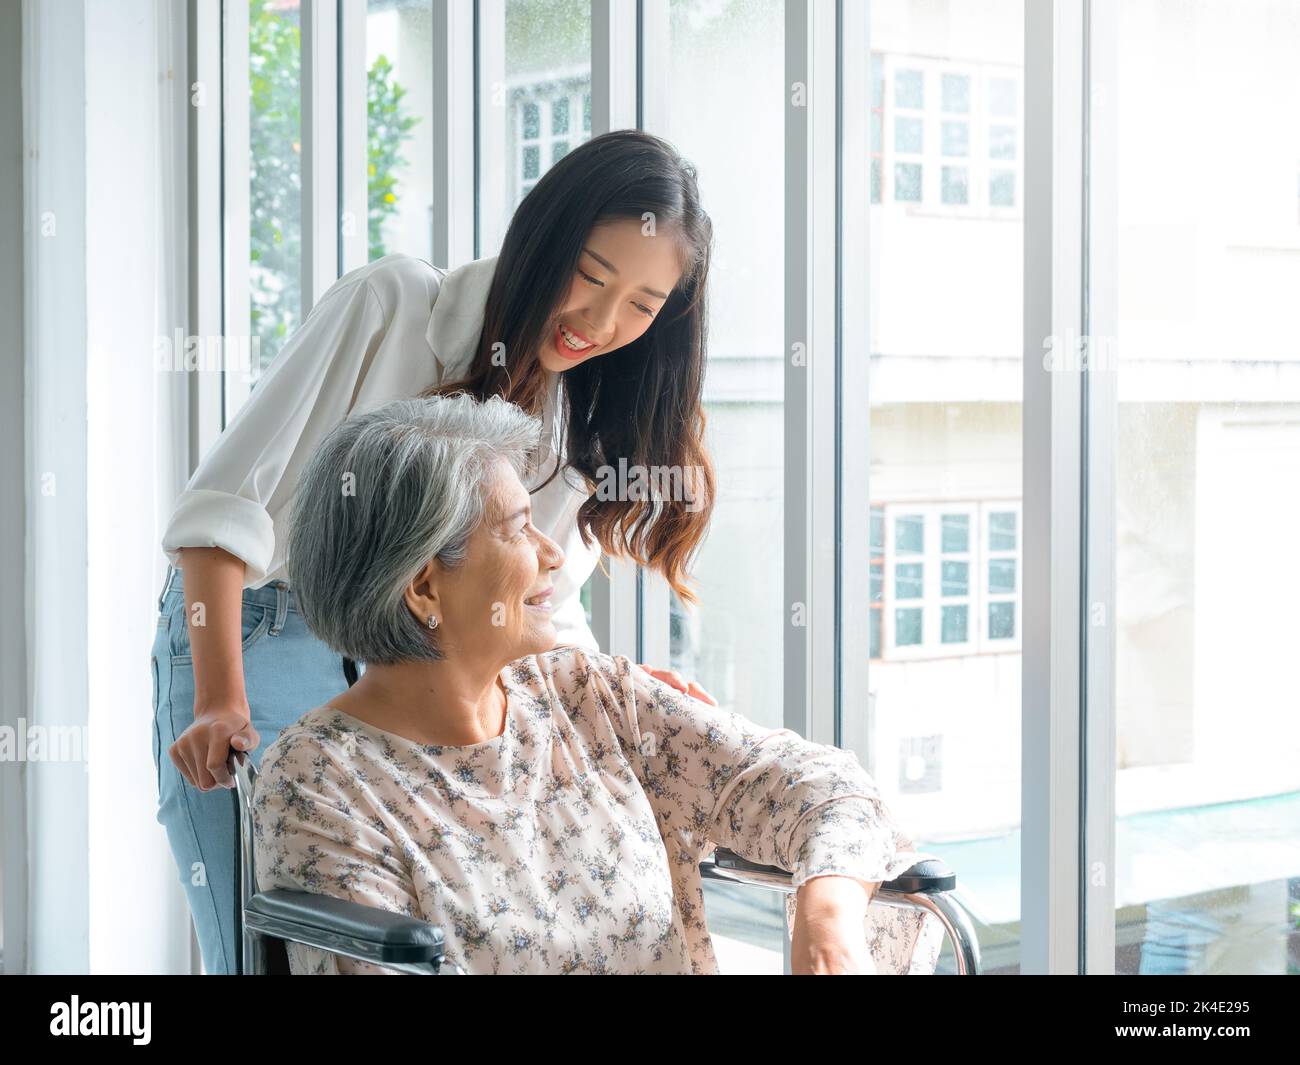 Happy Asian elderly woman, mother or grandparents on wheelchair taking care by caregiver, smiling young female, daughter or grandchild supporting at h Stock Photo